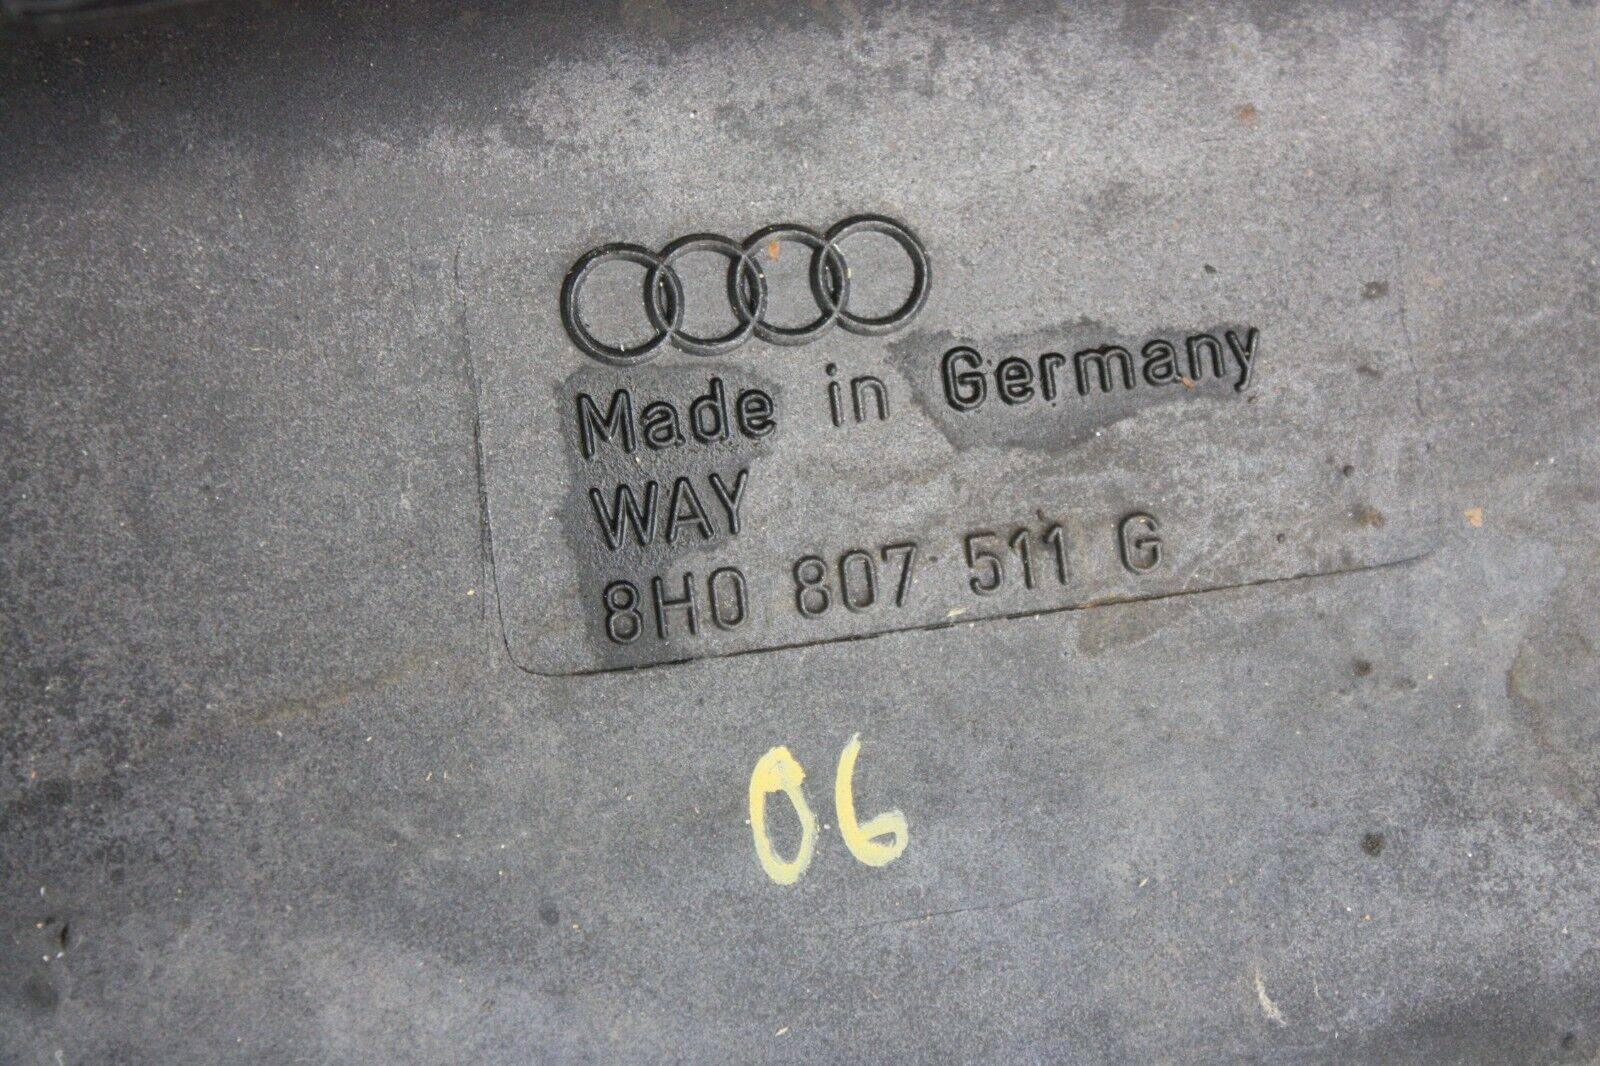 Audi-RS4-Convertible-Rear-Bumper-2005-TO-2008-8H0807511G-Genuine-DAMAGED-175690566029-18